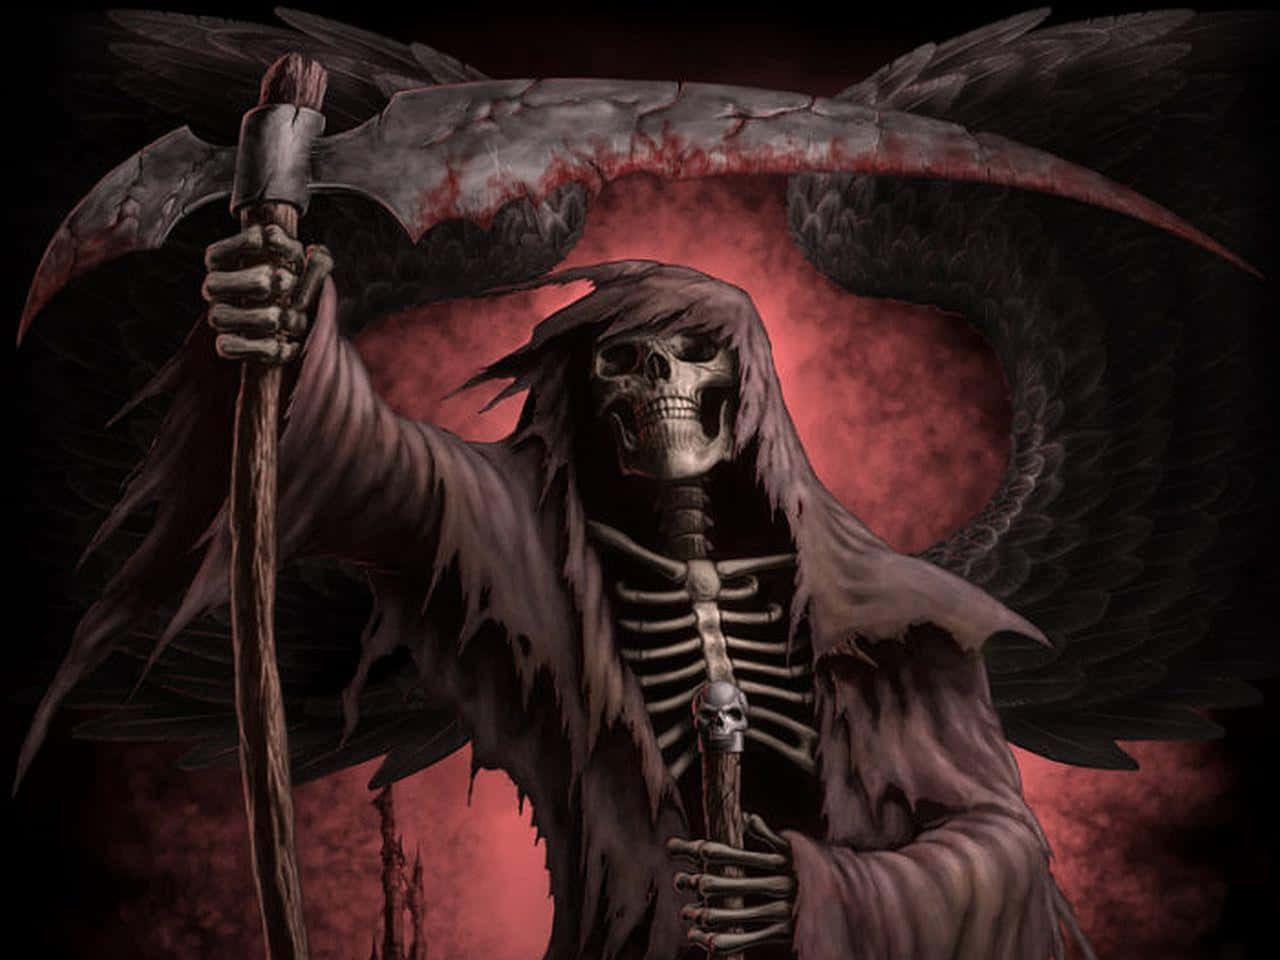 “The Grim Reaper – A Symbolic Warning of Mortality”